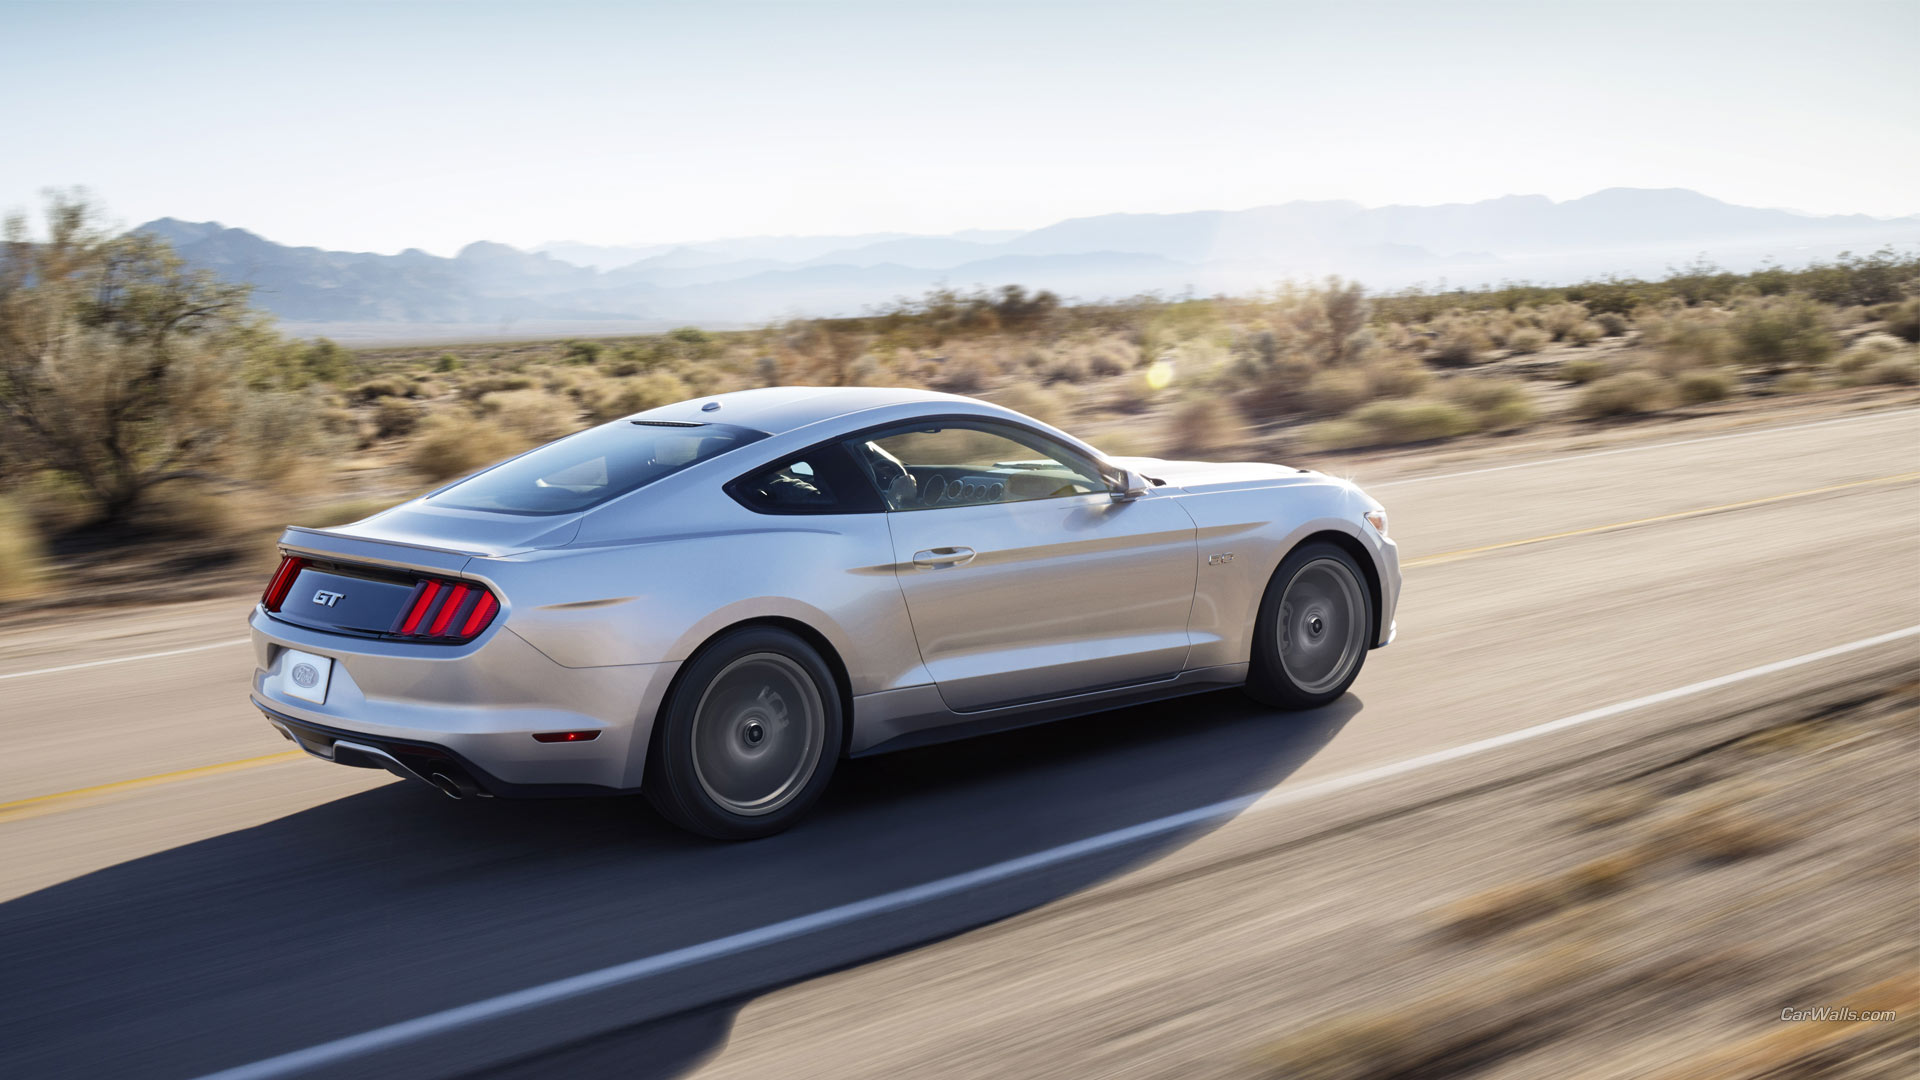 Vehicles 2015 Ford Mustang GT 1920x1080